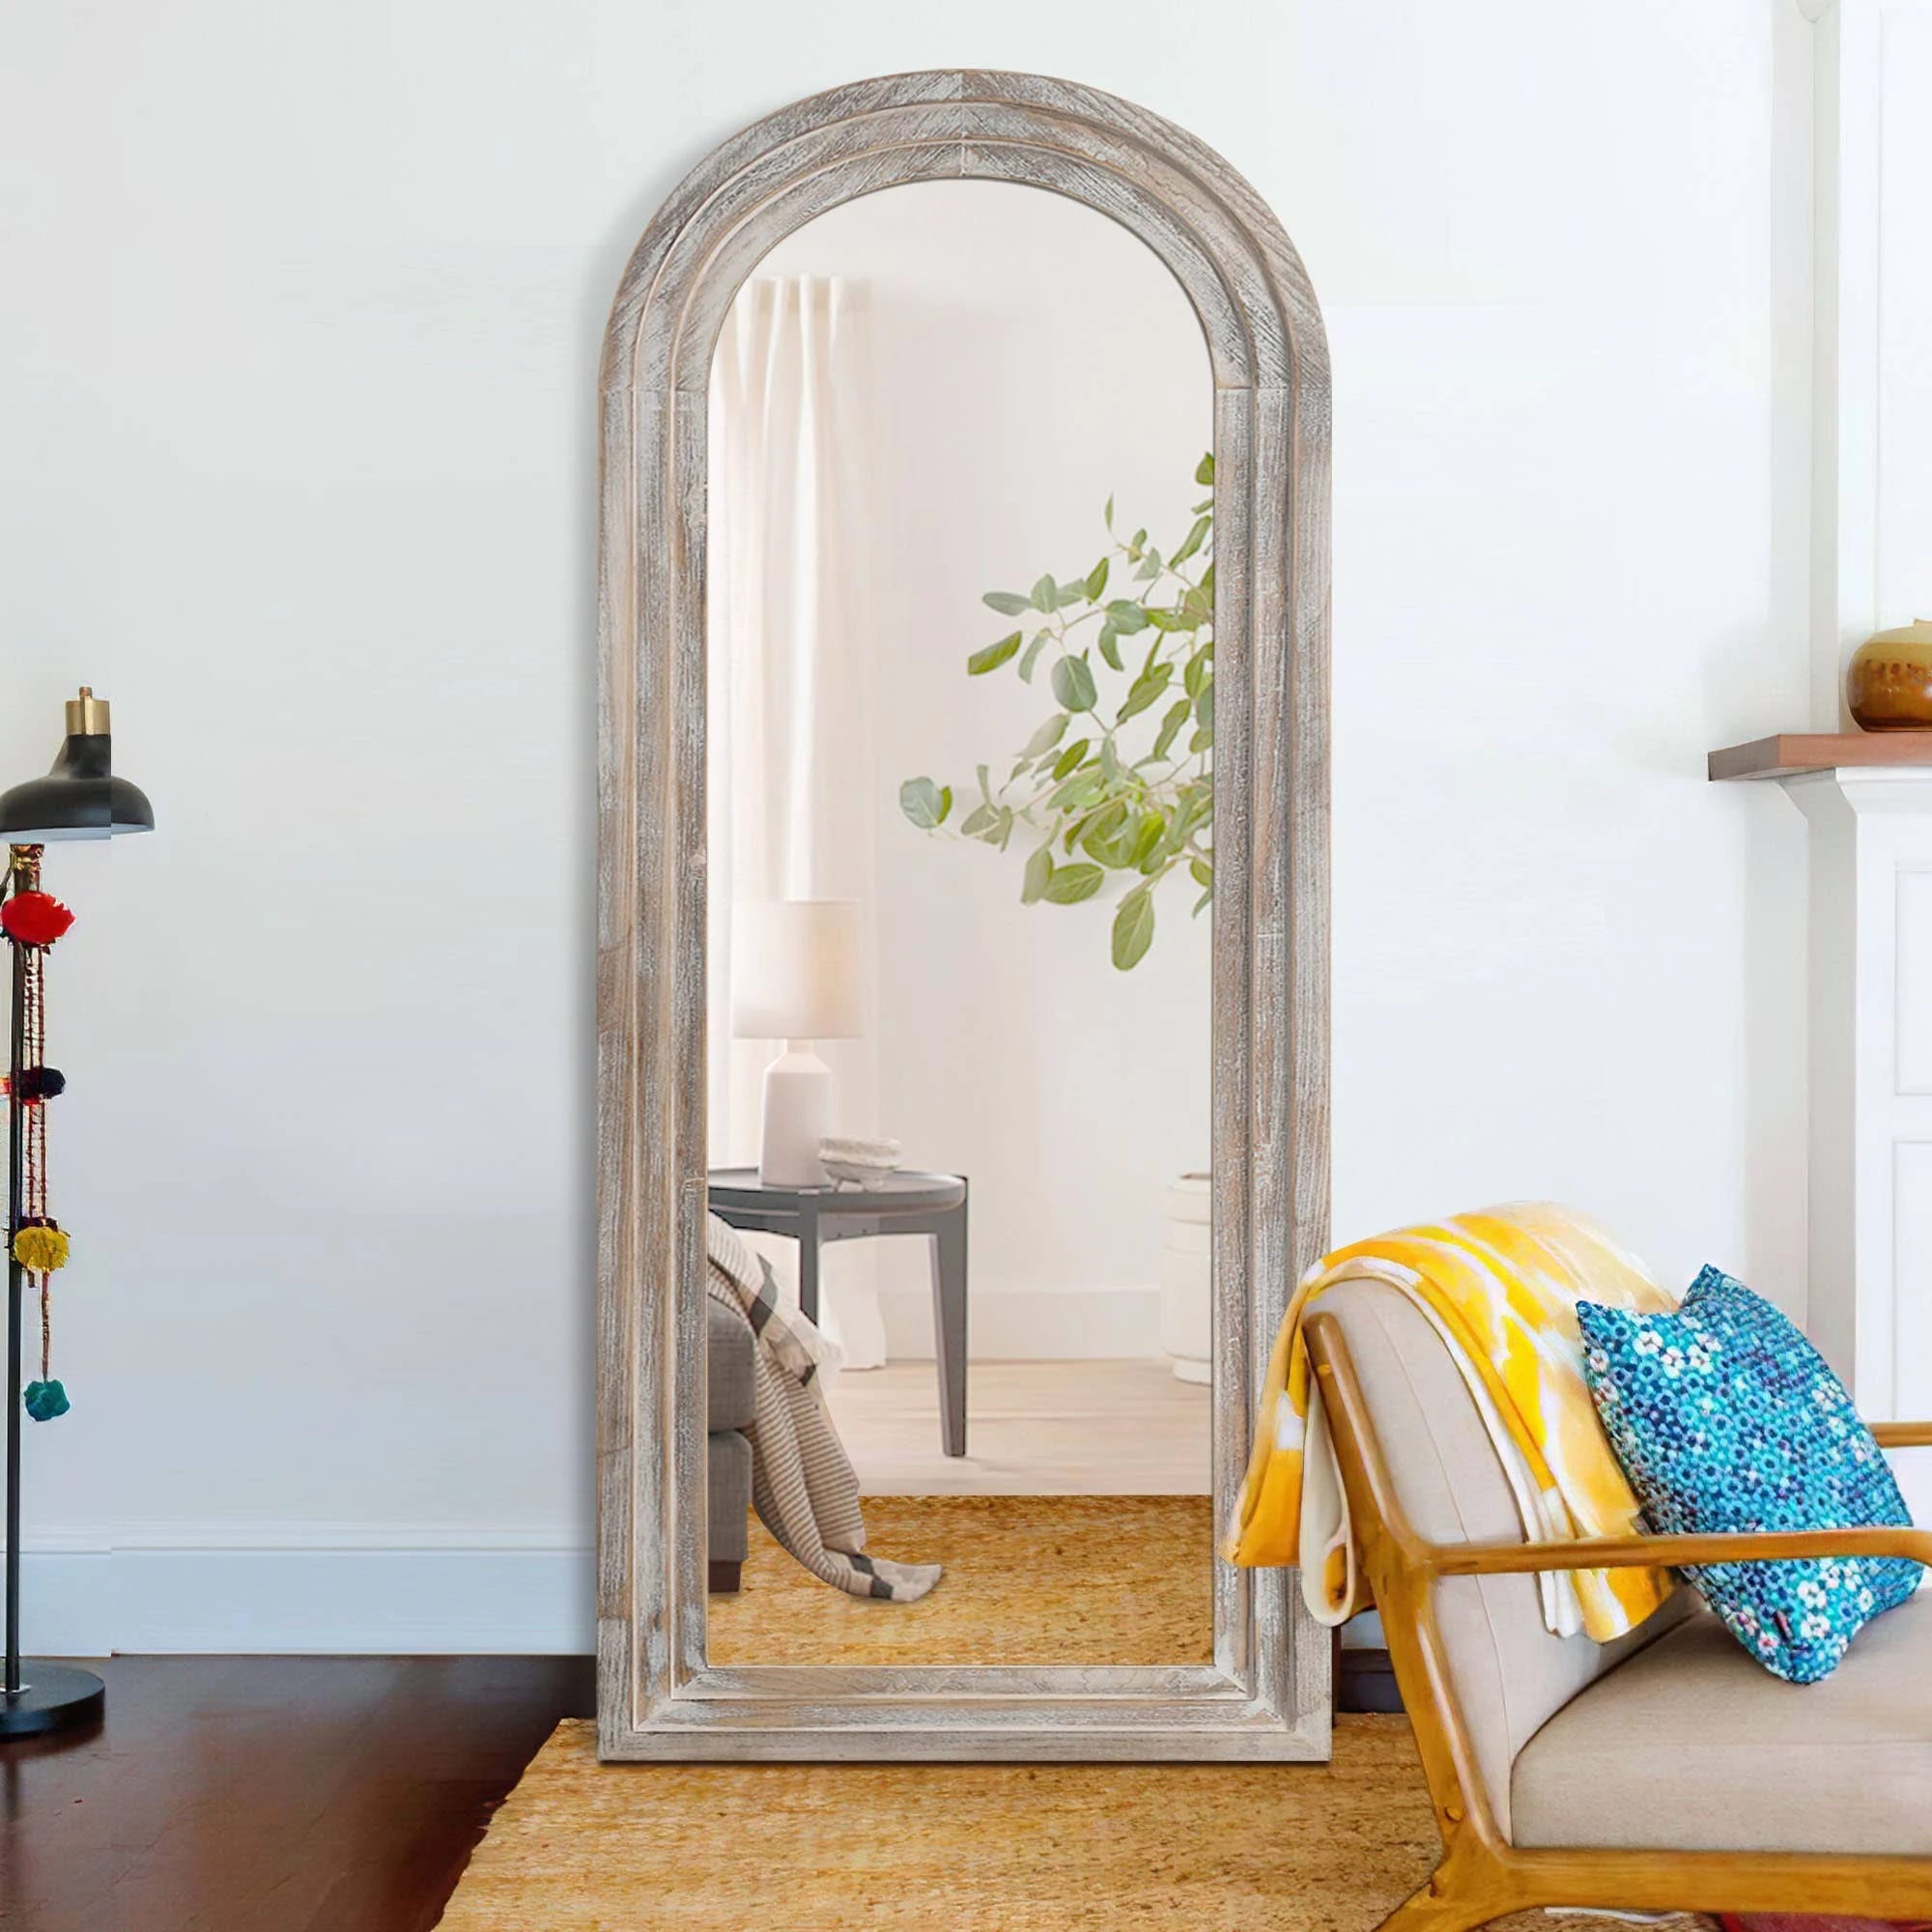 Rustic Arched Full Length Floor Mirror for Bedroom, Living Room, and Bathroom | Image